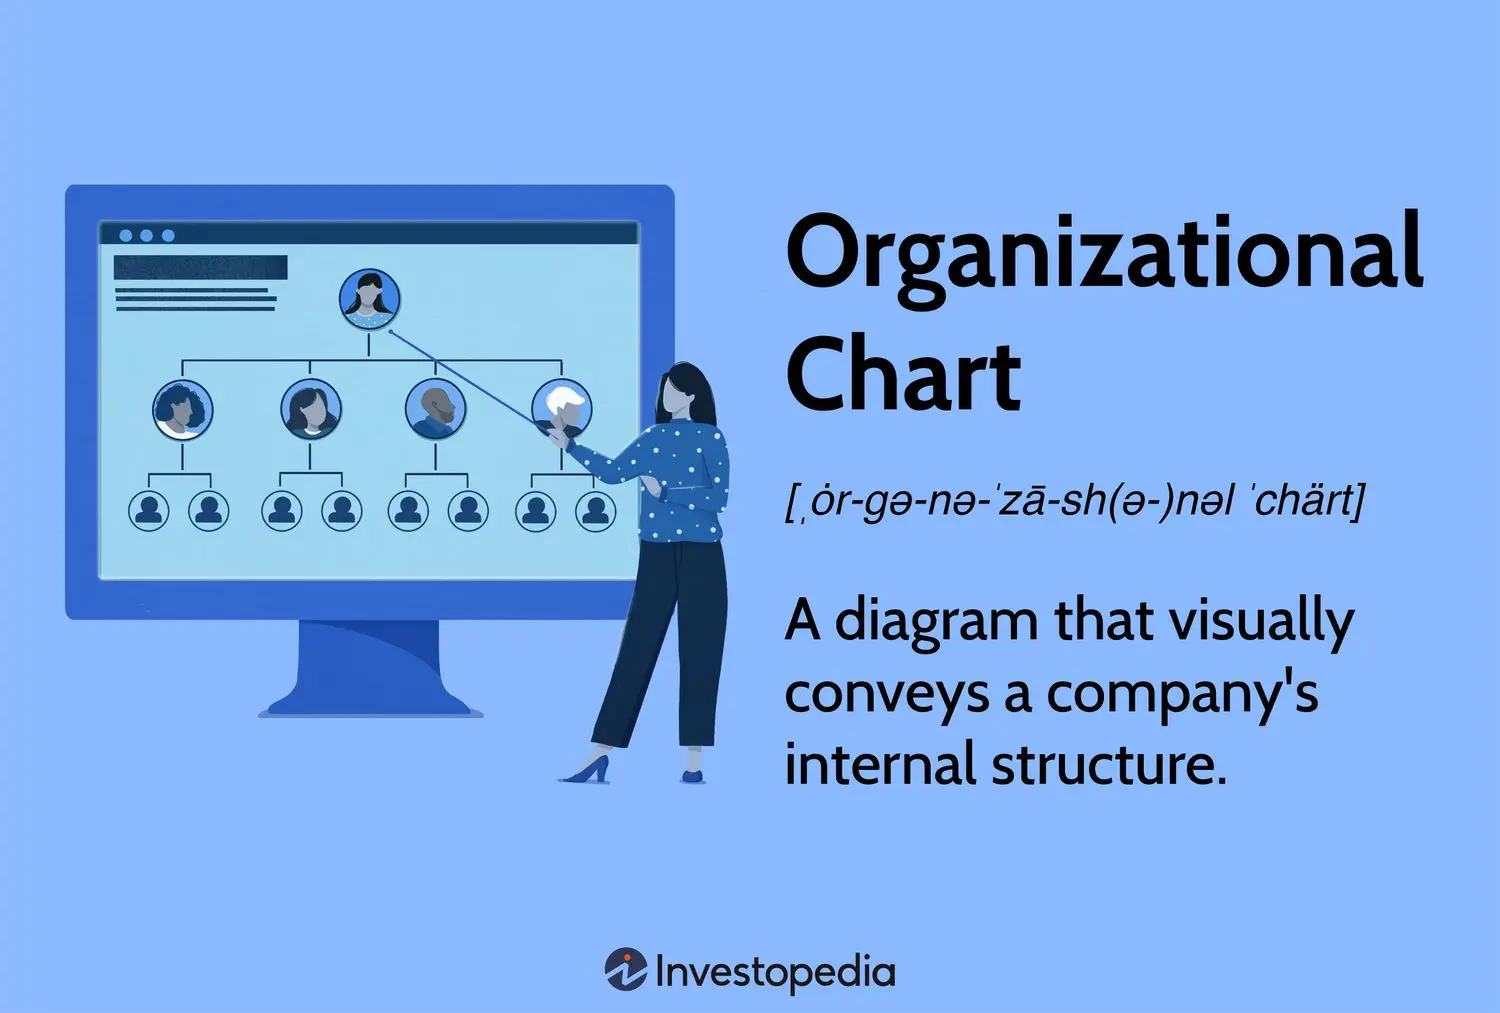 hewlett packard organizational structure chart - What is the diagram version of the organizational structure